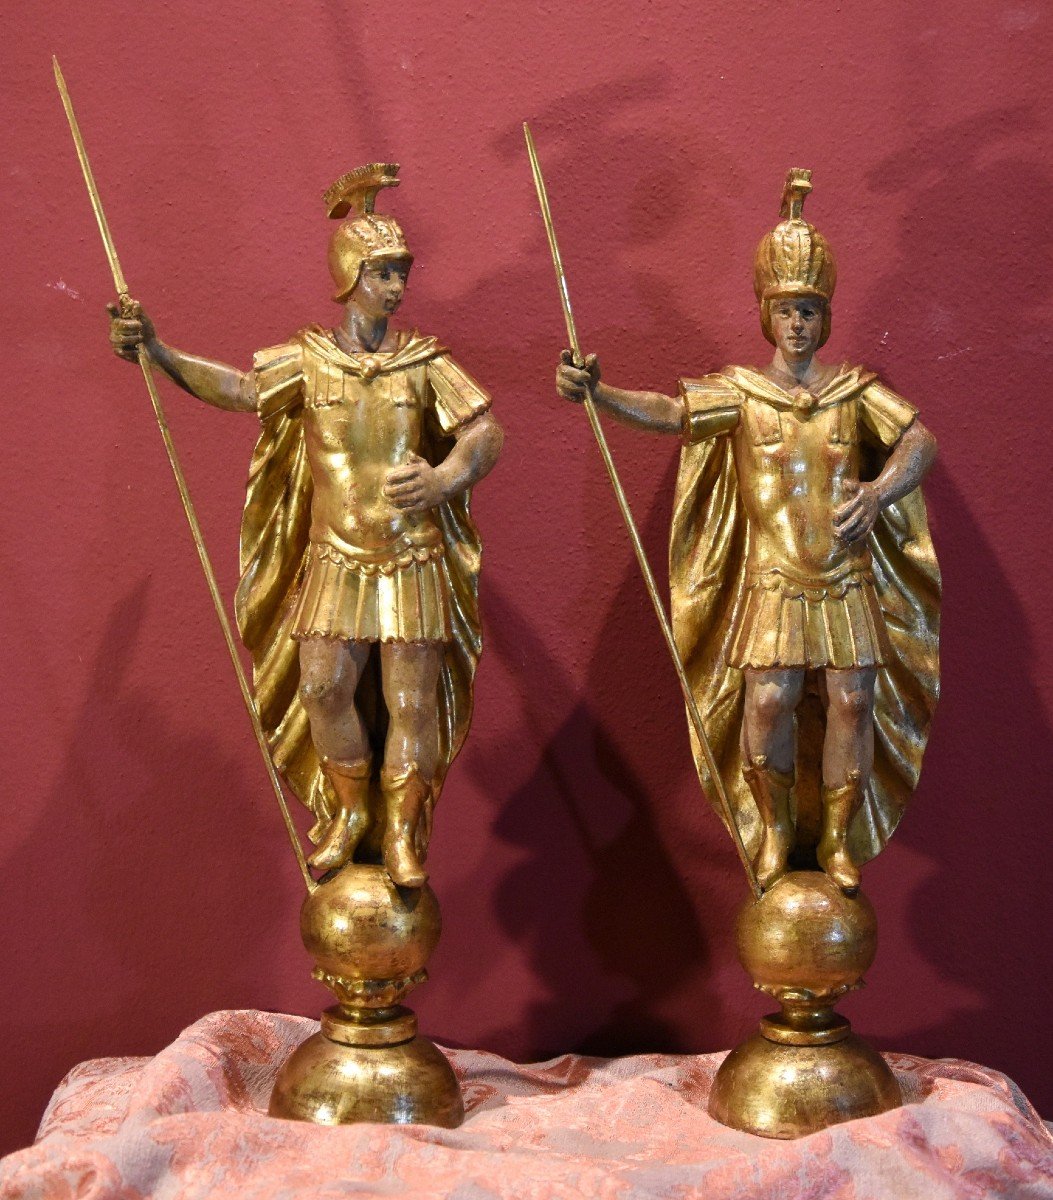 Wooden Sculptures Depicting A Pair Of Full-length Roman Soldiers, Rome, 18th Century-photo-2